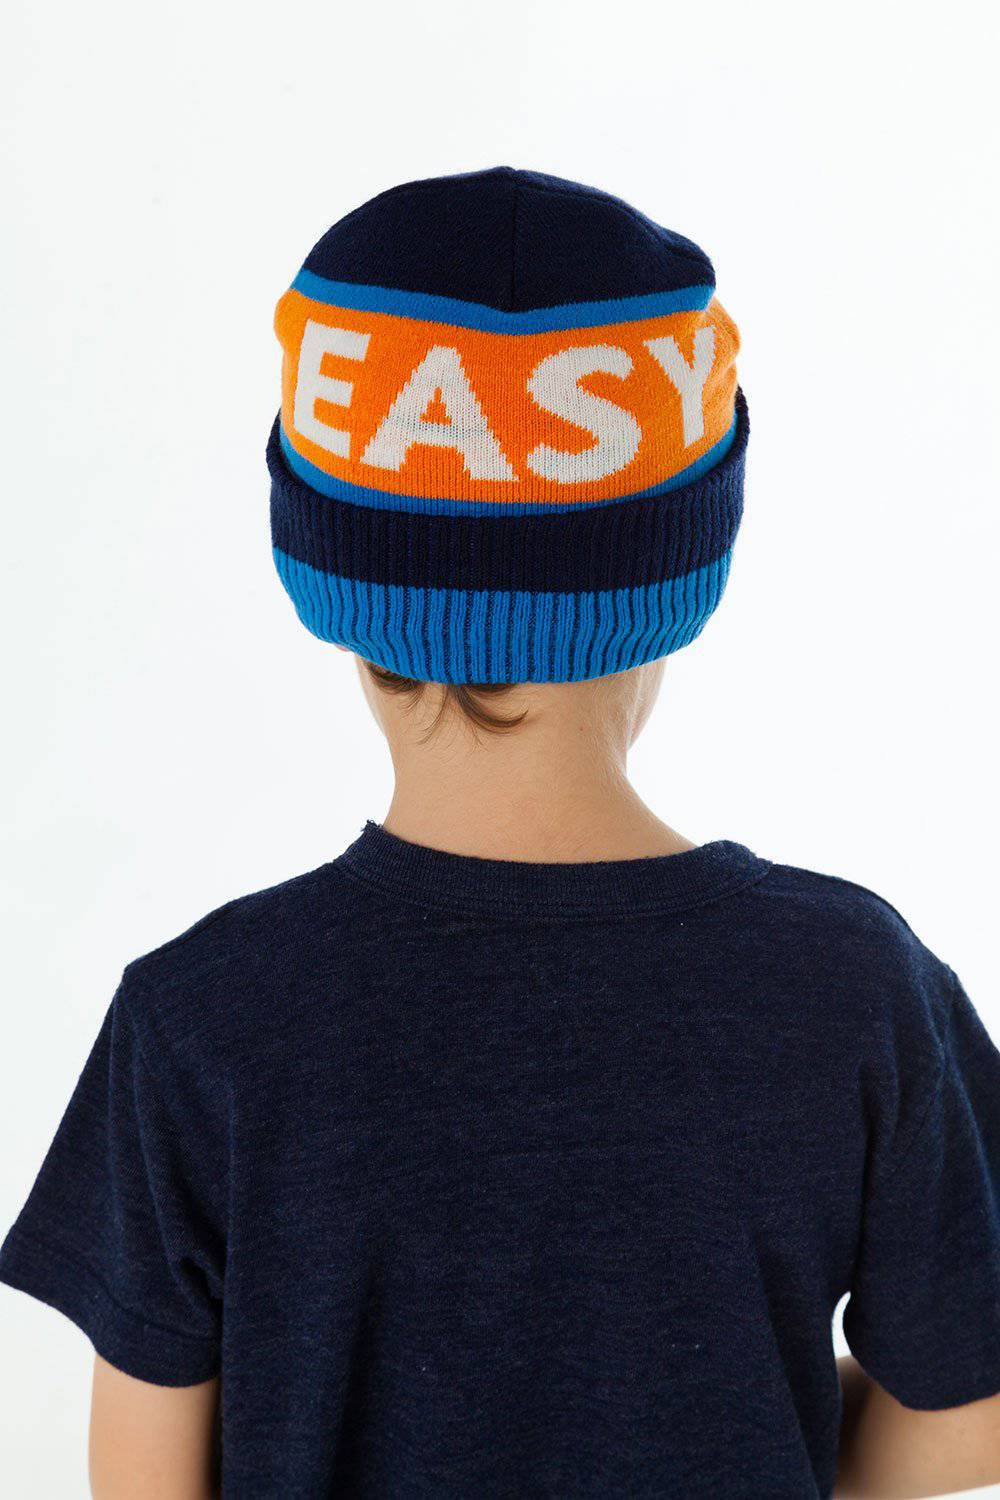 EASY TIGER BOYS chaserbrand